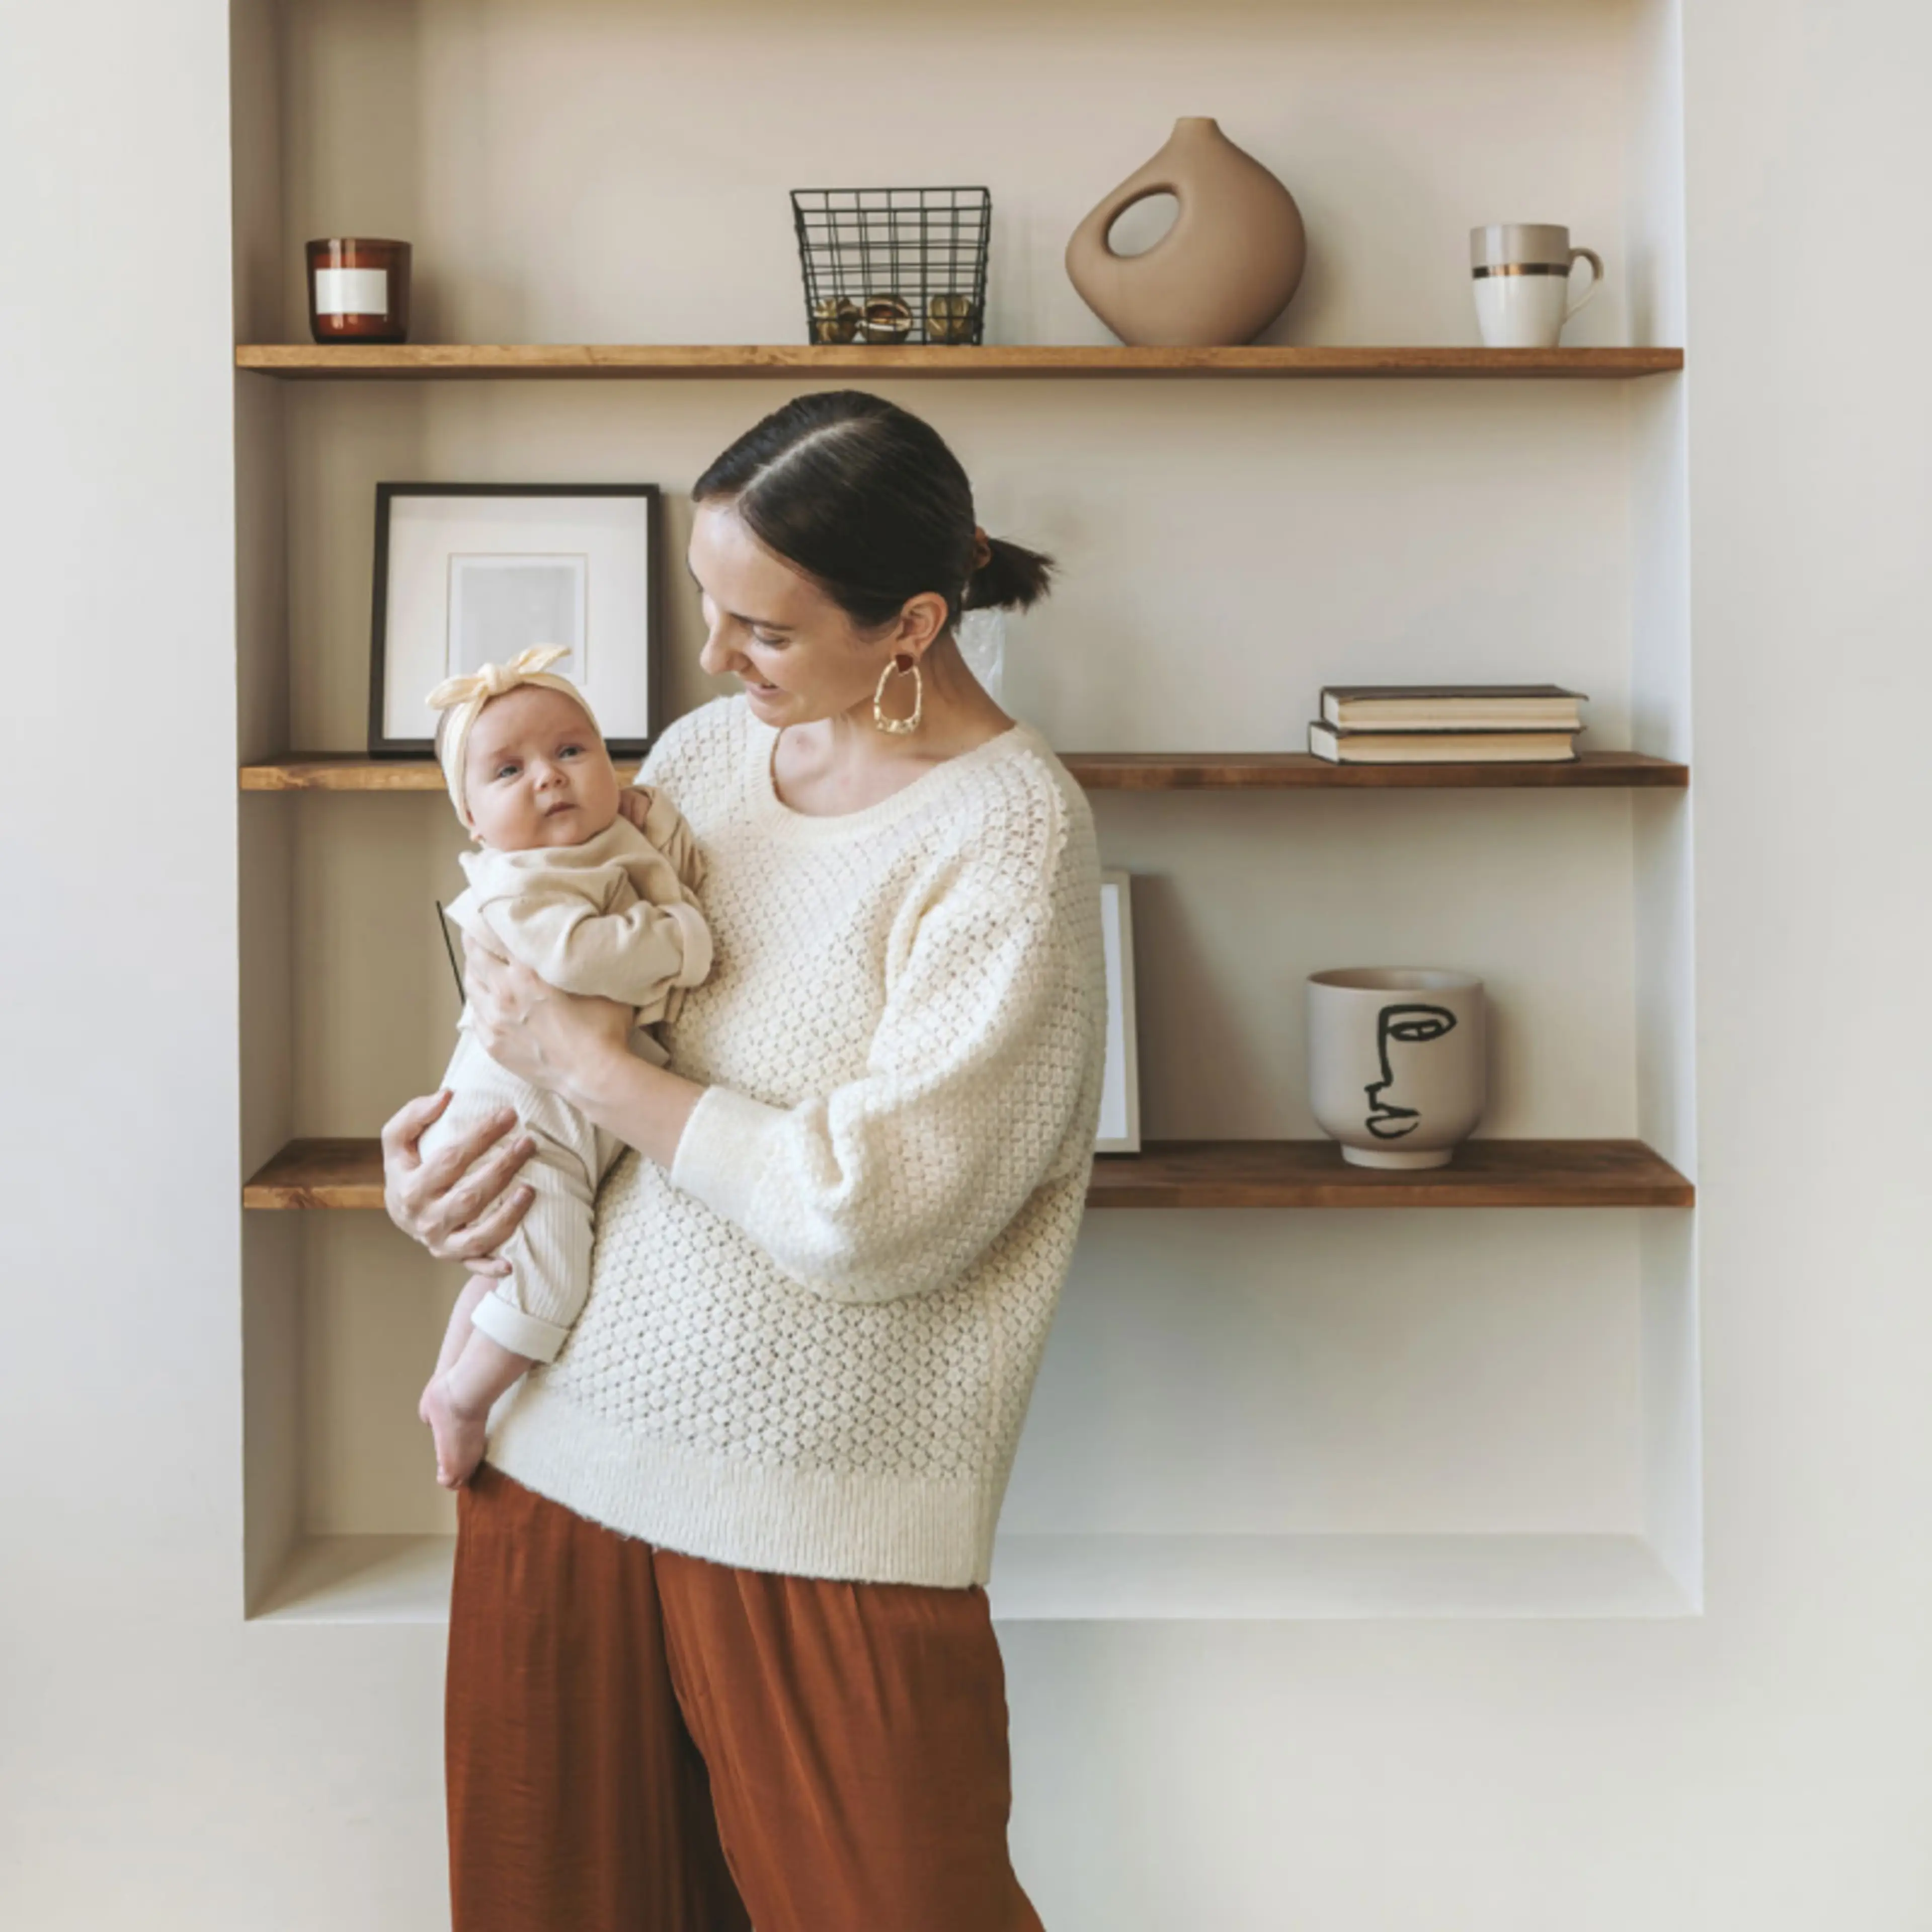 Banishing Perfectionism: 3 Strategies to Squash Self-Doubt as a New Mom